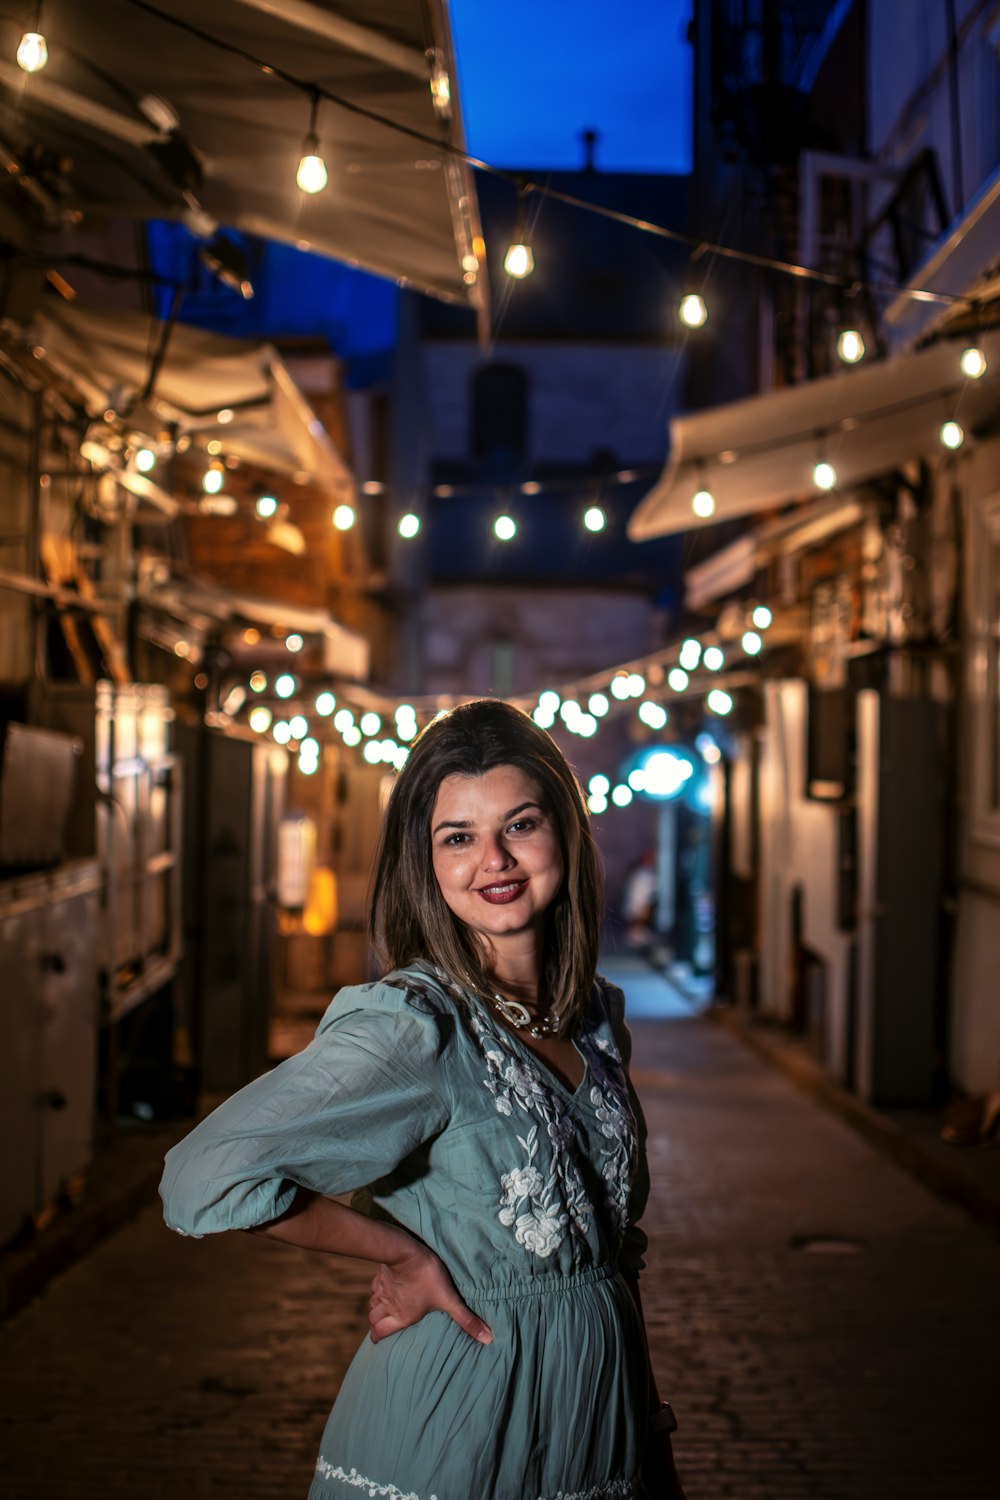 a woman standing in an alley way at night